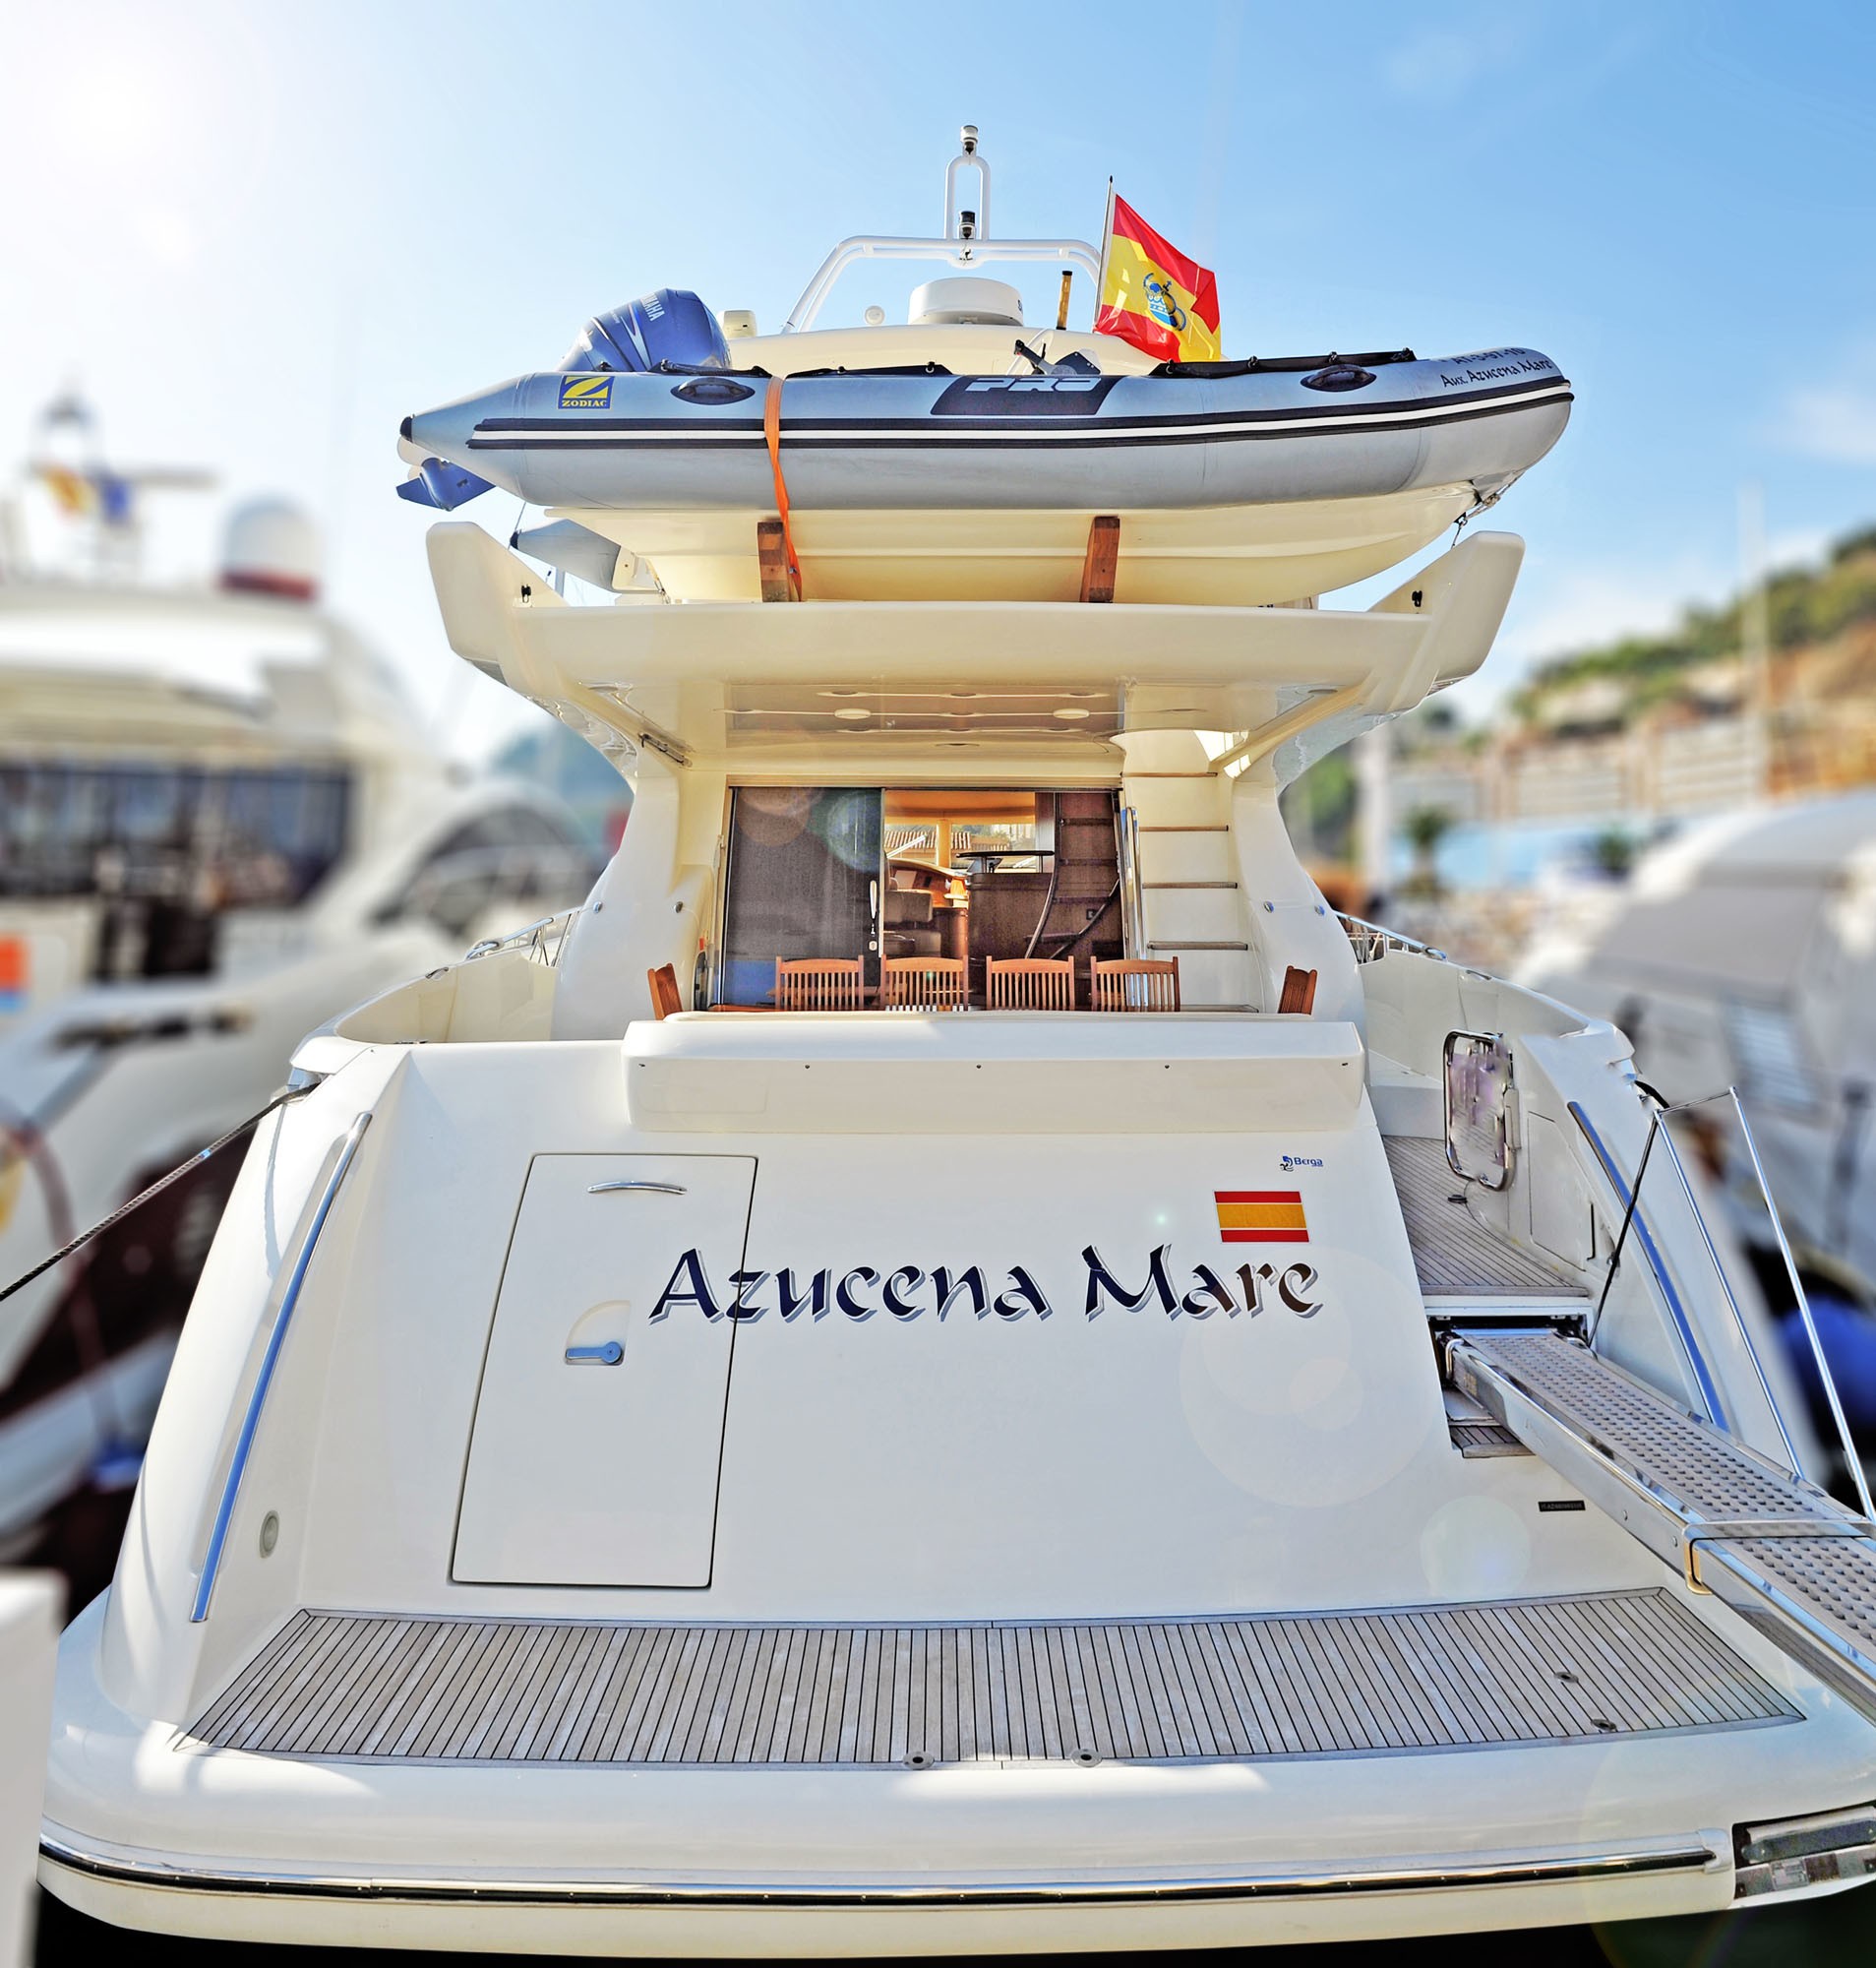 The 21m Yacht AZUCENA MARE